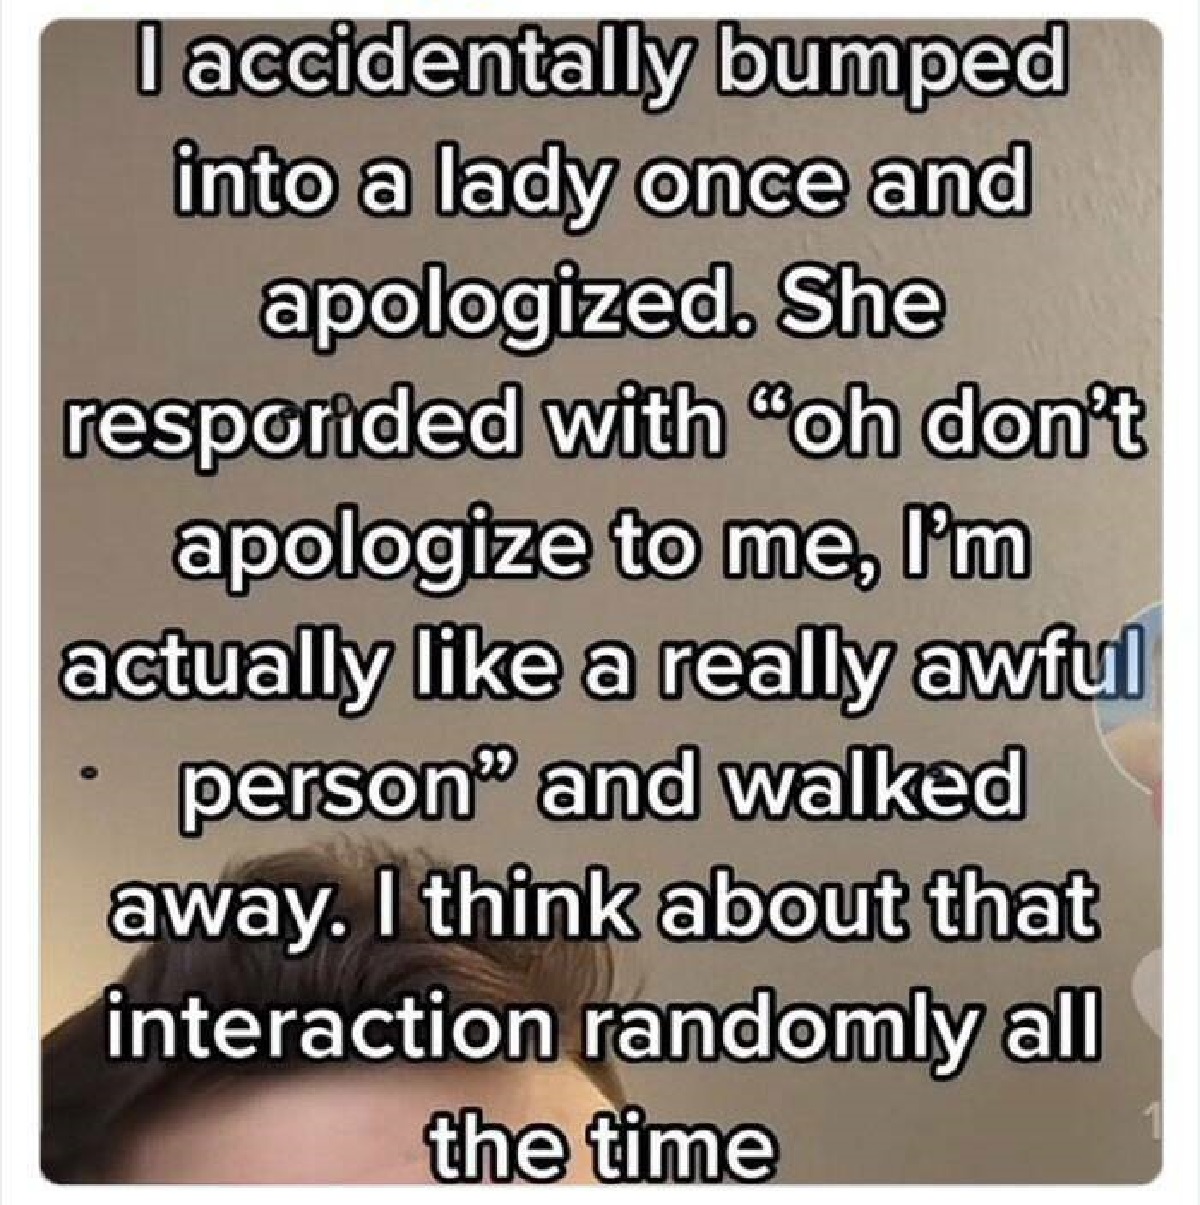 screenshot - I accidentally bumped into a lady once and apologized. She resporided with "oh don't apologize to me, I'm actually a really awful person" and walked away. I think about that interaction randomly all the time